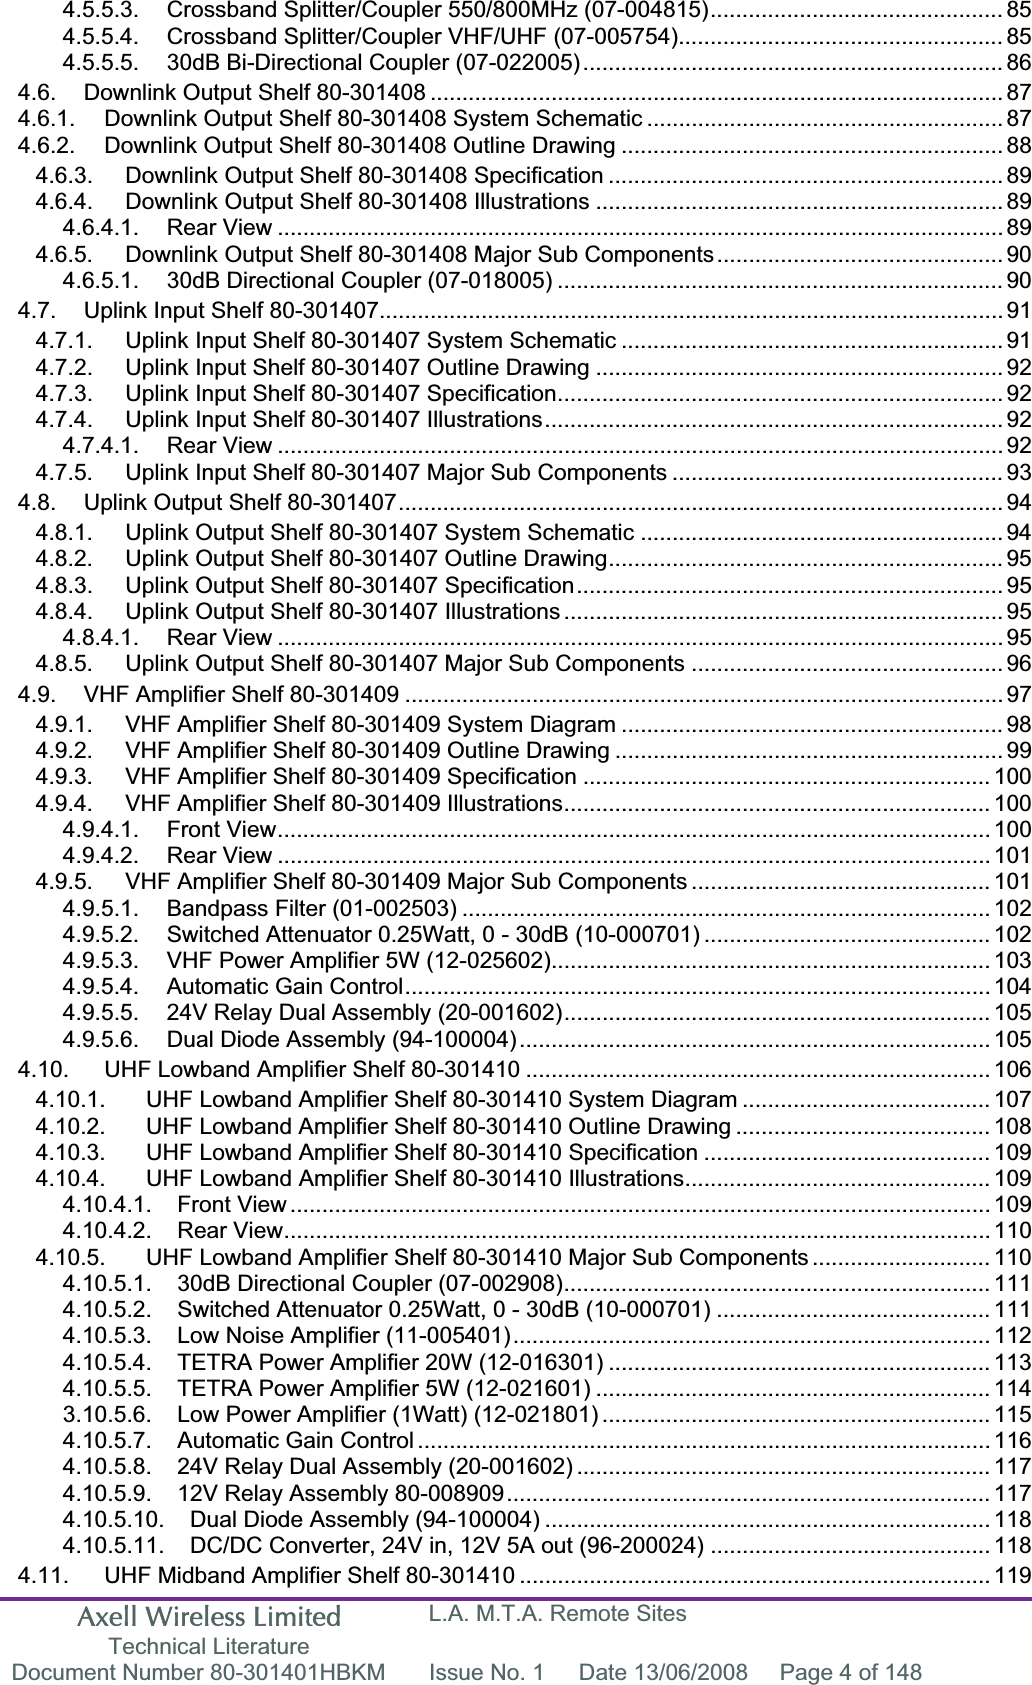 Axell Wireless Limited Technical Literature L.A. M.T.A. Remote Sites Document Number 80-301401HBKM  Issue No. 1  Date 13/06/2008  Page 4 of 148 4.5.5.3. Crossband Splitter/Coupler 550/800MHz (07-004815).............................................. 854.5.5.4. Crossband Splitter/Coupler VHF/UHF (07-005754)................................................... 854.5.5.5. 30dB Bi-Directional Coupler (07-022005).................................................................. 864.6. Downlink Output Shelf 80-301408 .......................................................................................... 874.6.1. Downlink Output Shelf 80-301408 System Schematic ........................................................ 874.6.2. Downlink Output Shelf 80-301408 Outline Drawing ............................................................ 884.6.3. Downlink Output Shelf 80-301408 Specification .............................................................. 894.6.4. Downlink Output Shelf 80-301408 Illustrations ................................................................ 894.6.4.1. Rear View .................................................................................................................. 894.6.5. Downlink Output Shelf 80-301408 Major Sub Components............................................. 904.6.5.1. 30dB Directional Coupler (07-018005) ...................................................................... 904.7. Uplink Input Shelf 80-301407.................................................................................................. 914.7.1. Uplink Input Shelf 80-301407 System Schematic ............................................................ 914.7.2. Uplink Input Shelf 80-301407 Outline Drawing ................................................................ 924.7.3. Uplink Input Shelf 80-301407 Specification...................................................................... 924.7.4. Uplink Input Shelf 80-301407 Illustrations........................................................................ 924.7.4.1. Rear View .................................................................................................................. 924.7.5. Uplink Input Shelf 80-301407 Major Sub Components .................................................... 934.8. Uplink Output Shelf 80-301407...............................................................................................944.8.1. Uplink Output Shelf 80-301407 System Schematic ......................................................... 944.8.2. Uplink Output Shelf 80-301407 Outline Drawing.............................................................. 954.8.3. Uplink Output Shelf 80-301407 Specification................................................................... 954.8.4. Uplink Output Shelf 80-301407 Illustrations ..................................................................... 954.8.4.1. Rear View .................................................................................................................. 954.8.5. Uplink Output Shelf 80-301407 Major Sub Components ................................................. 964.9. VHF Amplifier Shelf 80-301409 .............................................................................................. 974.9.1. VHF Amplifier Shelf 80-301409 System Diagram ............................................................ 984.9.2. VHF Amplifier Shelf 80-301409 Outline Drawing ............................................................. 994.9.3. VHF Amplifier Shelf 80-301409 Specification ................................................................ 1004.9.4. VHF Amplifier Shelf 80-301409 Illustrations................................................................... 1004.9.4.1. Front View................................................................................................................ 1004.9.4.2. Rear View ................................................................................................................ 1014.9.5. VHF Amplifier Shelf 80-301409 Major Sub Components ............................................... 1014.9.5.1. Bandpass Filter (01-002503) ................................................................................... 1024.9.5.2. Switched Attenuator 0.25Watt, 0 - 30dB (10-000701) ............................................. 1024.9.5.3. VHF Power Amplifier 5W (12-025602)..................................................................... 1034.9.5.4. Automatic Gain Control............................................................................................ 1044.9.5.5. 24V Relay Dual Assembly (20-001602)................................................................... 1054.9.5.6. Dual Diode Assembly (94-100004).......................................................................... 1054.10. UHF Lowband Amplifier Shelf 80-301410 ......................................................................... 1064.10.1. UHF Lowband Amplifier Shelf 80-301410 System Diagram ....................................... 1074.10.2. UHF Lowband Amplifier Shelf 80-301410 Outline Drawing ........................................ 1084.10.3. UHF Lowband Amplifier Shelf 80-301410 Specification ............................................. 1094.10.4. UHF Lowband Amplifier Shelf 80-301410 Illustrations................................................ 1094.10.4.1. Front View .............................................................................................................. 1094.10.4.2. Rear View............................................................................................................... 1104.10.5. UHF Lowband Amplifier Shelf 80-301410 Major Sub Components ............................ 1104.10.5.1. 30dB Directional Coupler (07-002908)................................................................... 1114.10.5.2. Switched Attenuator 0.25Watt, 0 - 30dB (10-000701) ........................................... 1114.10.5.3. Low Noise Amplifier (11-005401)........................................................................... 1124.10.5.4. TETRA Power Amplifier 20W (12-016301) ............................................................ 1134.10.5.5. TETRA Power Amplifier 5W (12-021601) .............................................................. 1143.10.5.6. Low Power Amplifier (1Watt) (12-021801) ............................................................. 1154.10.5.7. Automatic Gain Control .......................................................................................... 1164.10.5.8. 24V Relay Dual Assembly (20-001602) ................................................................. 1174.10.5.9. 12V Relay Assembly 80-008909............................................................................ 1174.10.5.10. Dual Diode Assembly (94-100004) ...................................................................... 1184.10.5.11. DC/DC Converter, 24V in, 12V 5A out (96-200024) ............................................ 1184.11. UHF Midband Amplifier Shelf 80-301410 .......................................................................... 119